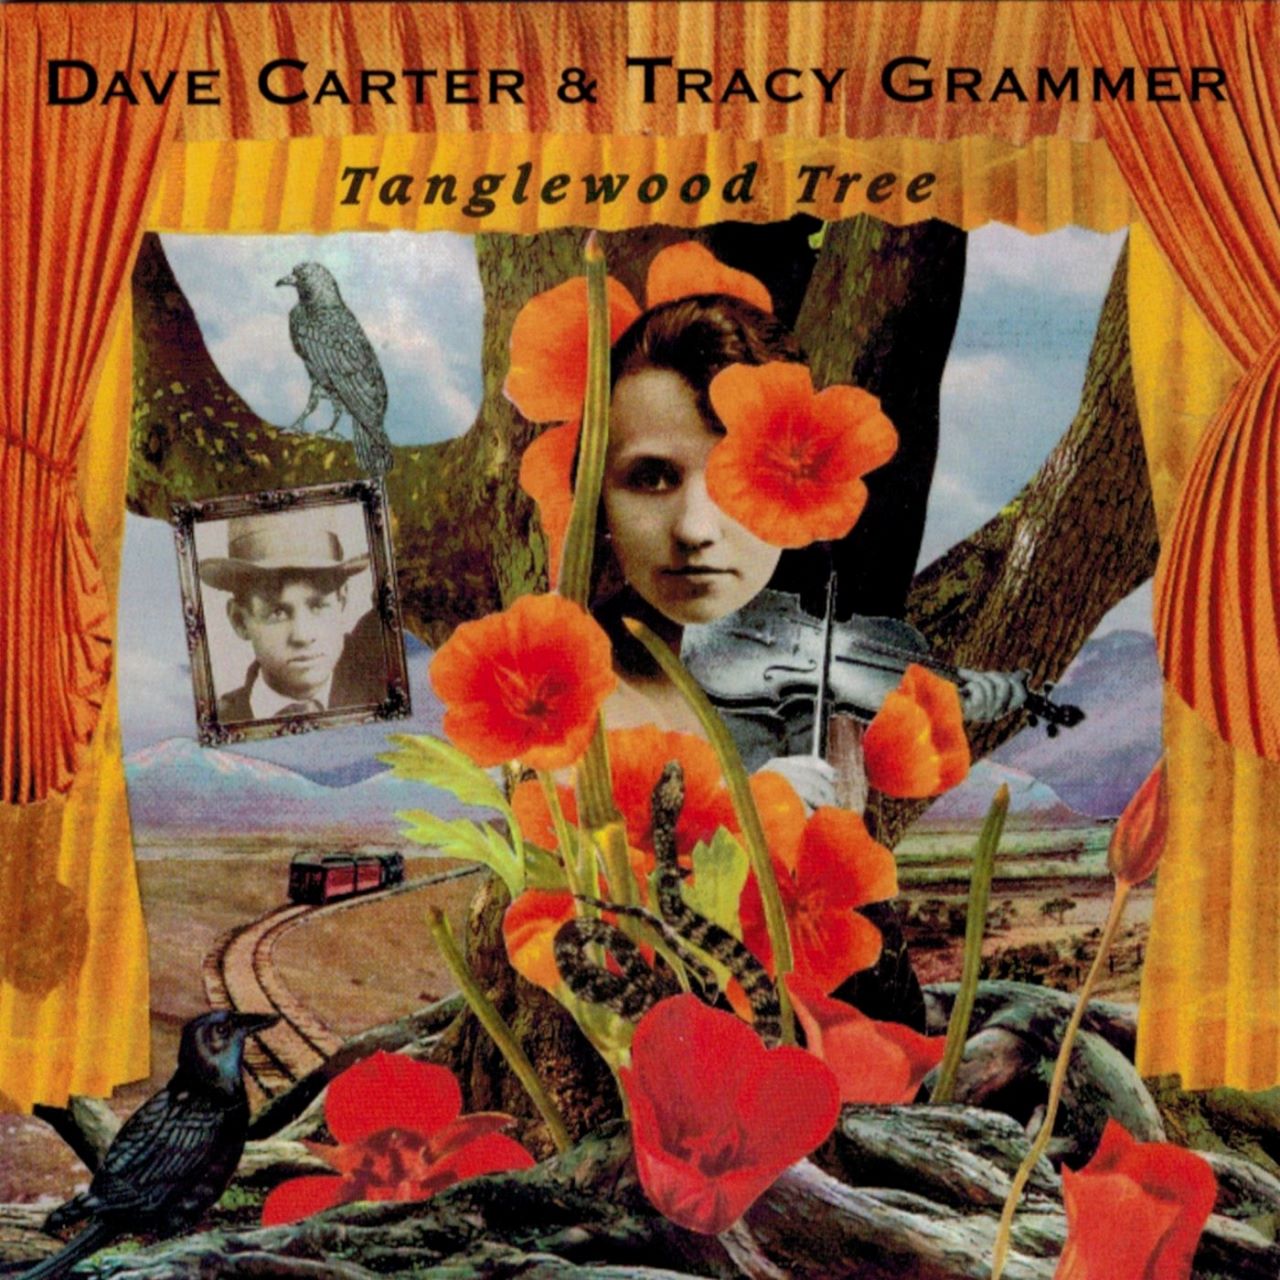 Dave Carter & Tracy Grammer - Tanglewood Tree cover album